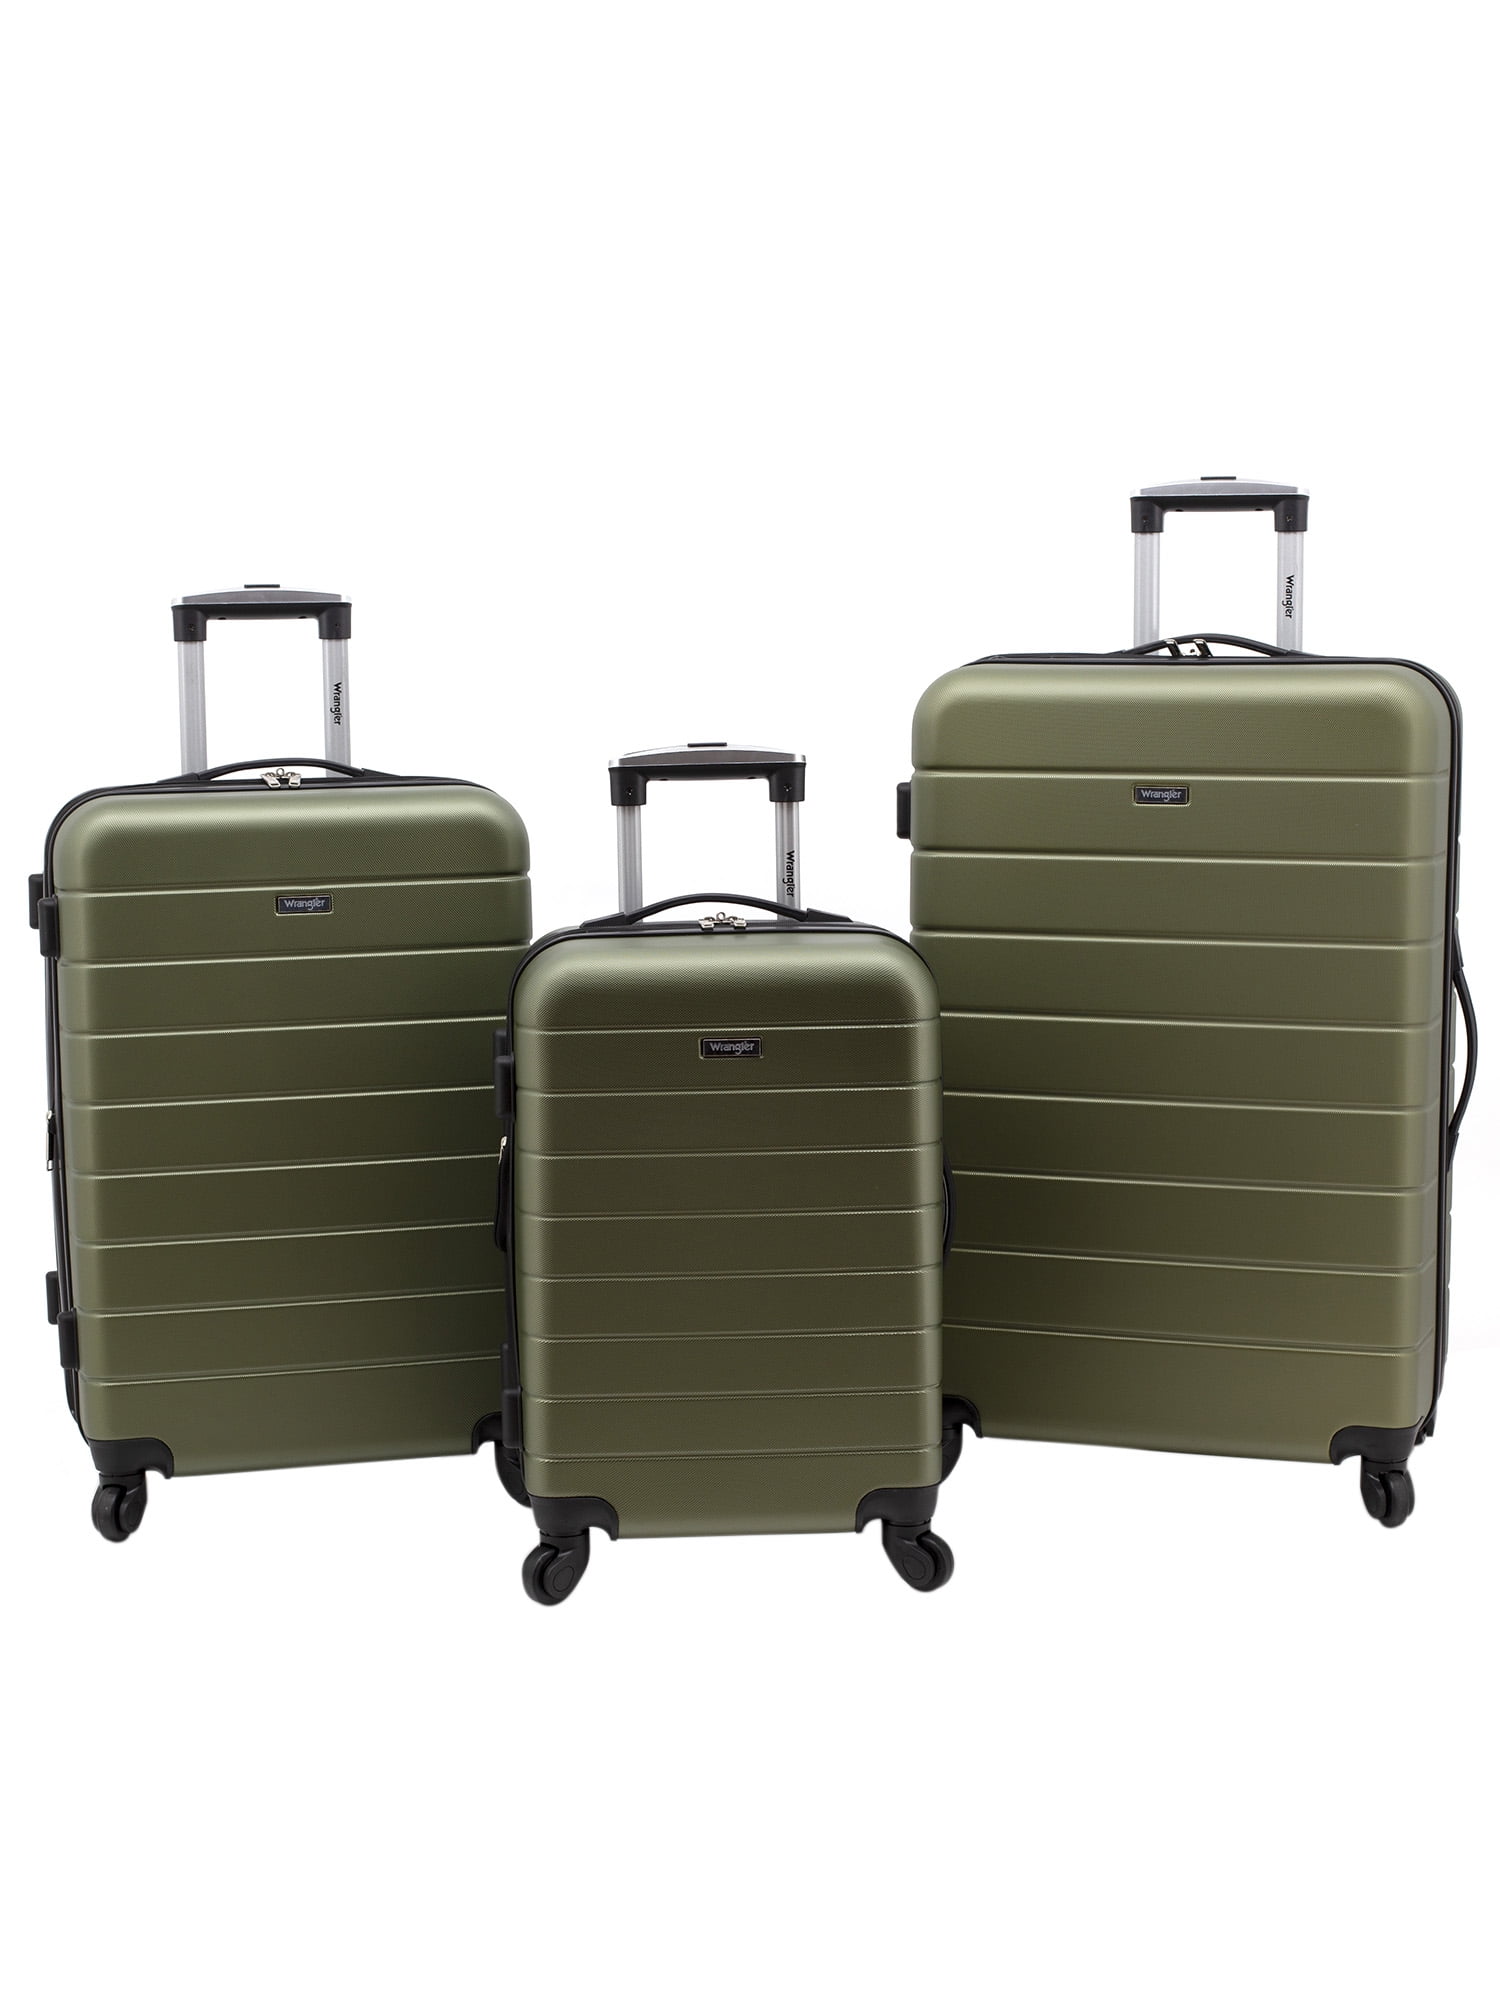 Wrangler 3 Piece Luggage Set with Cup Holder and USB Port, Olive Green -  